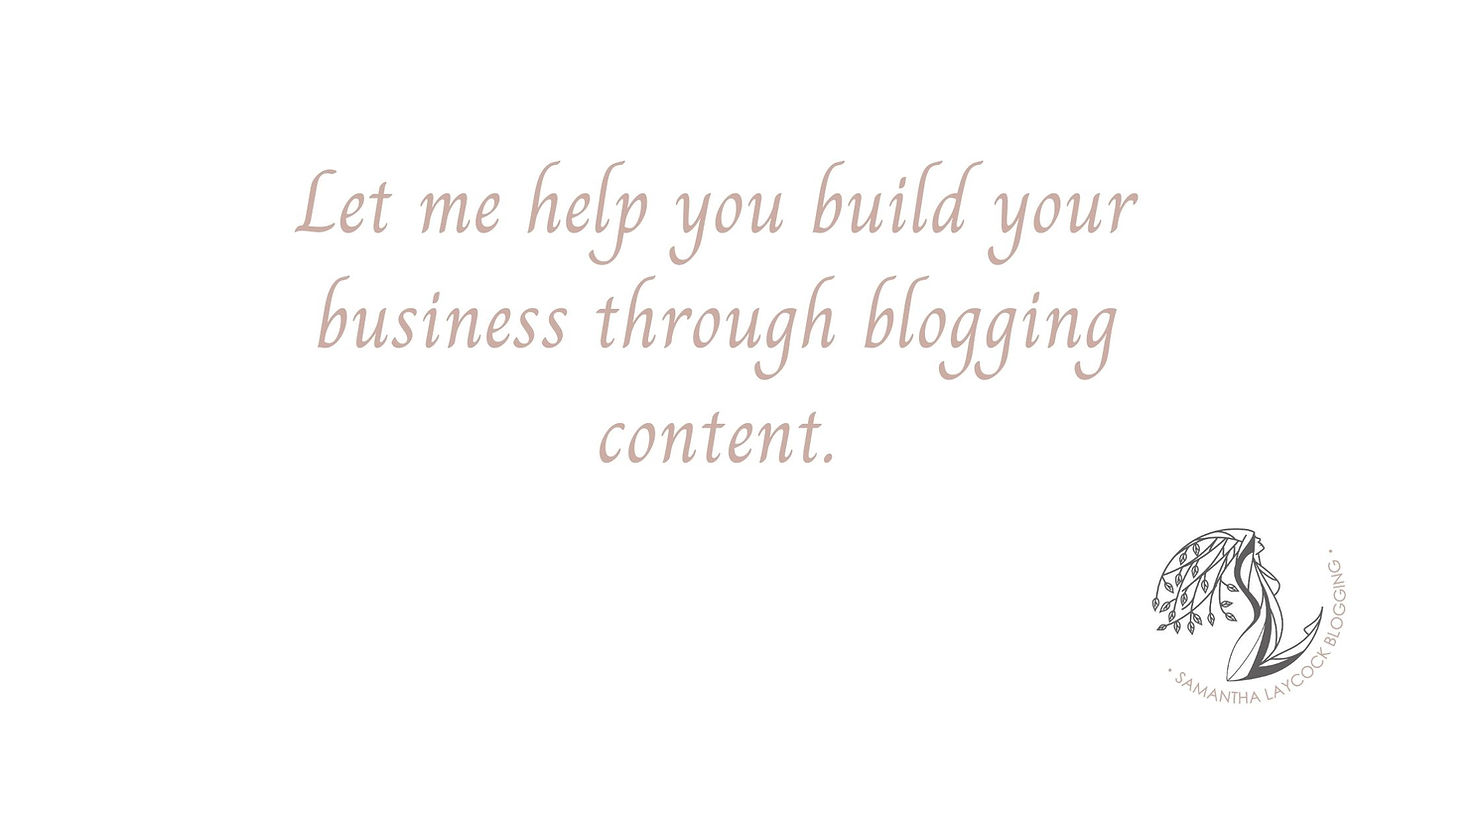 A freelance blogger can help you build your business brand through blogging.